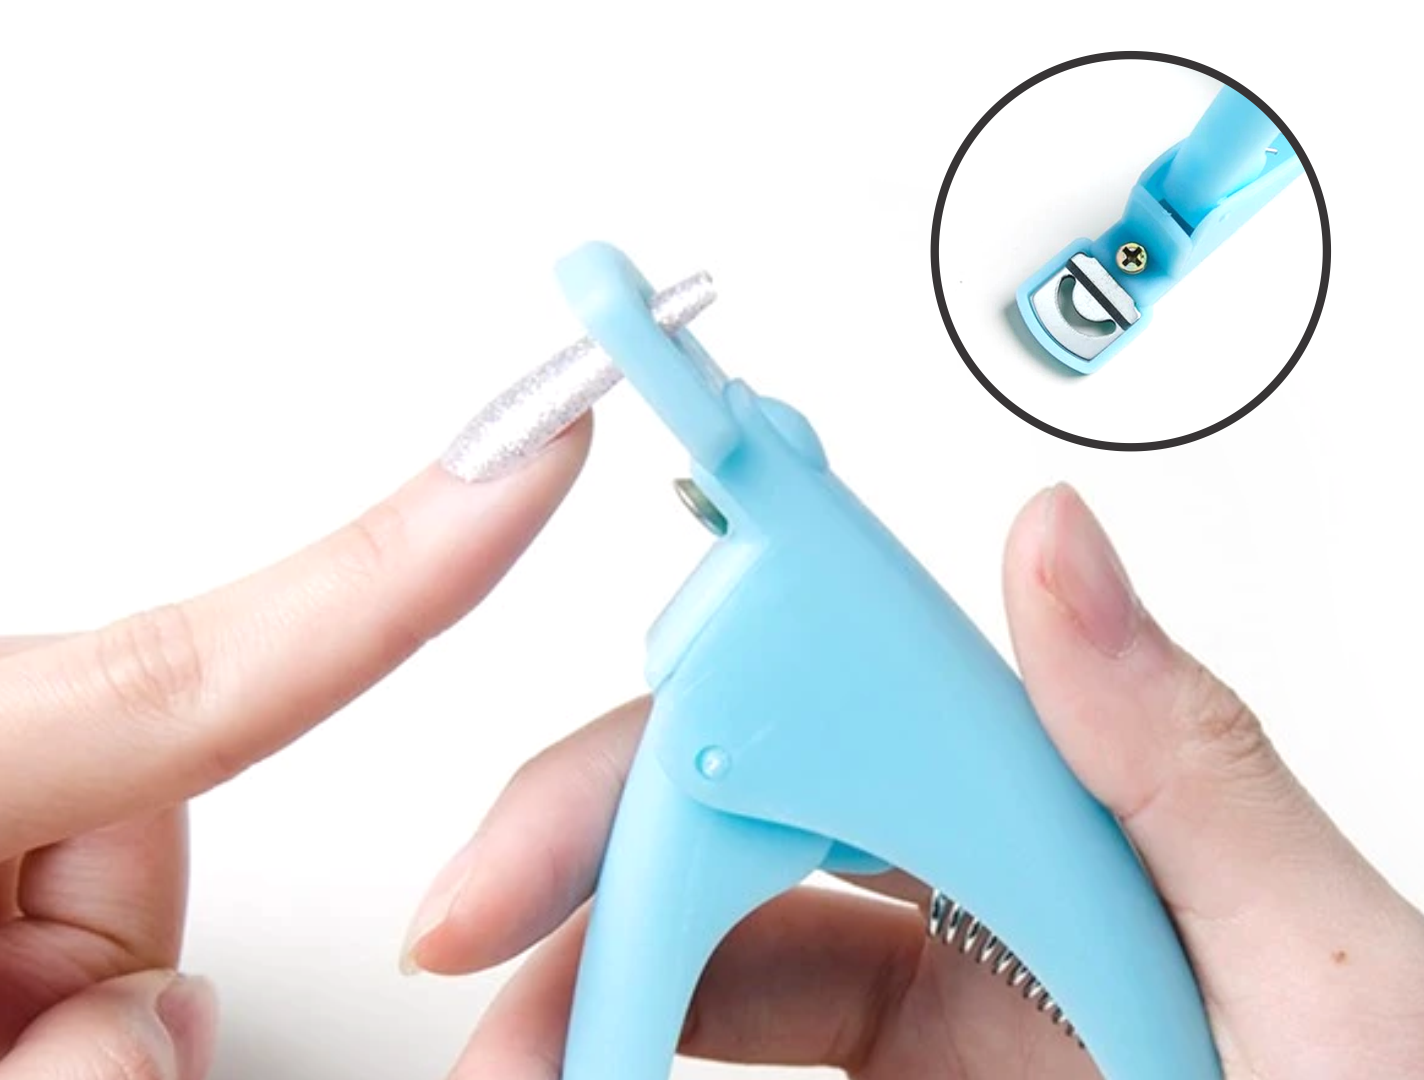 cge HIGH Quality Big Nail Cutter Nail Cutter,Nail Clipper,Pedicure,MENICURE,Scissor  - Price in India, Buy cge HIGH Quality Big Nail Cutter Nail Cutter,Nail  Clipper,Pedicure,MENICURE,Scissor Online In India, Reviews, Ratings &  Features | Flipkart.com